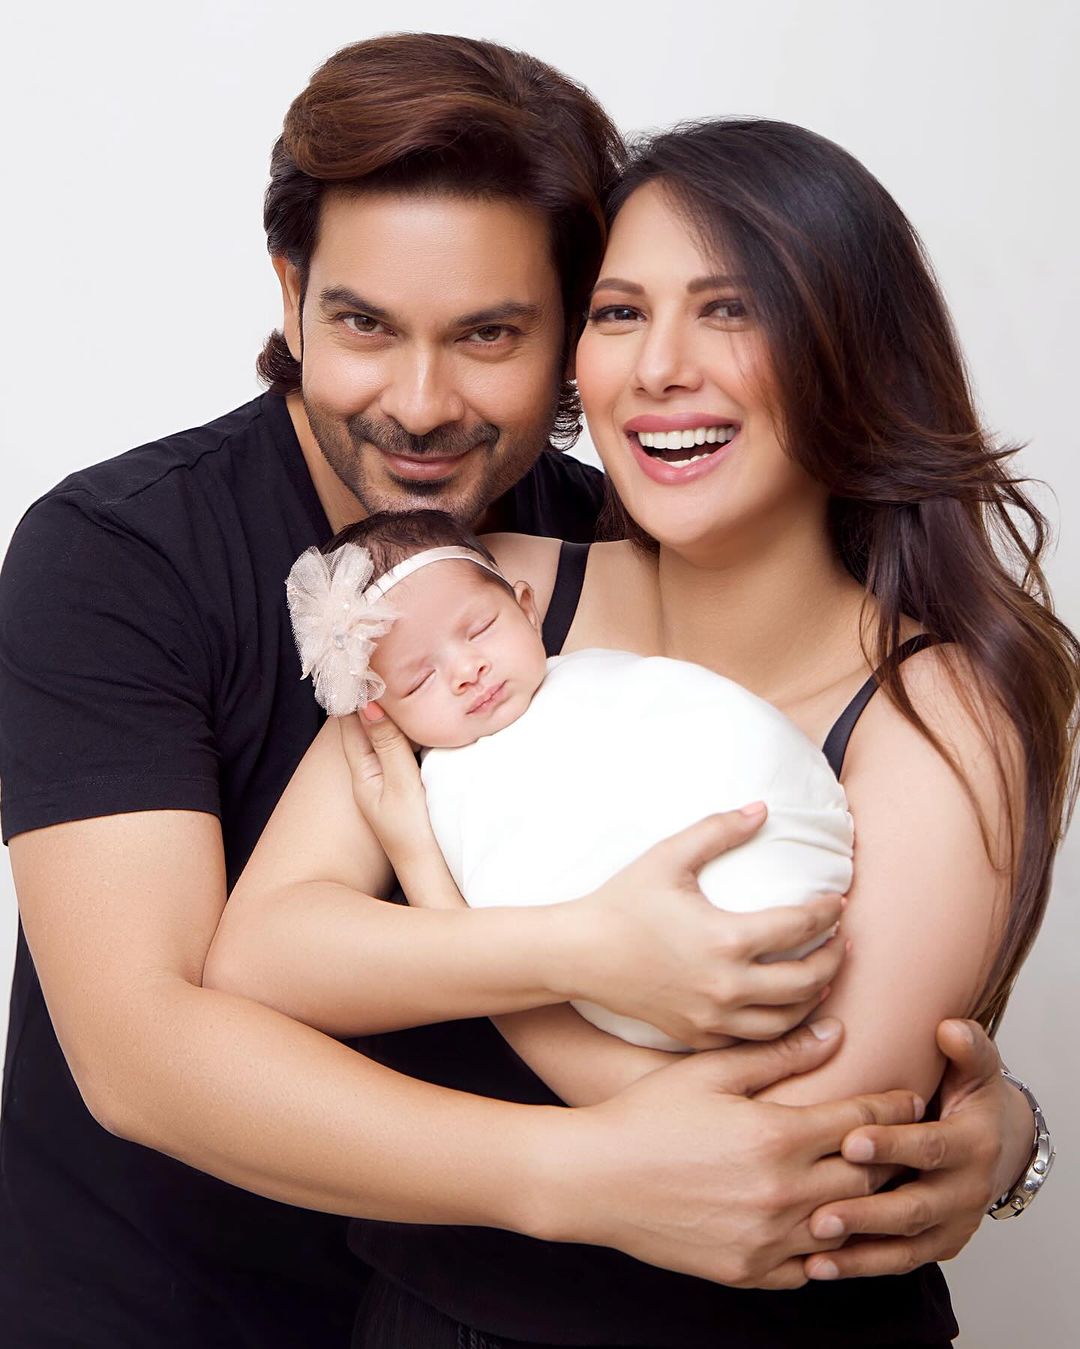 The Kapil Sharma Fame Couple Rochelle Rao And Keith Sequeira Revealed Their Two-Month-Old Baby Girl Face And Name